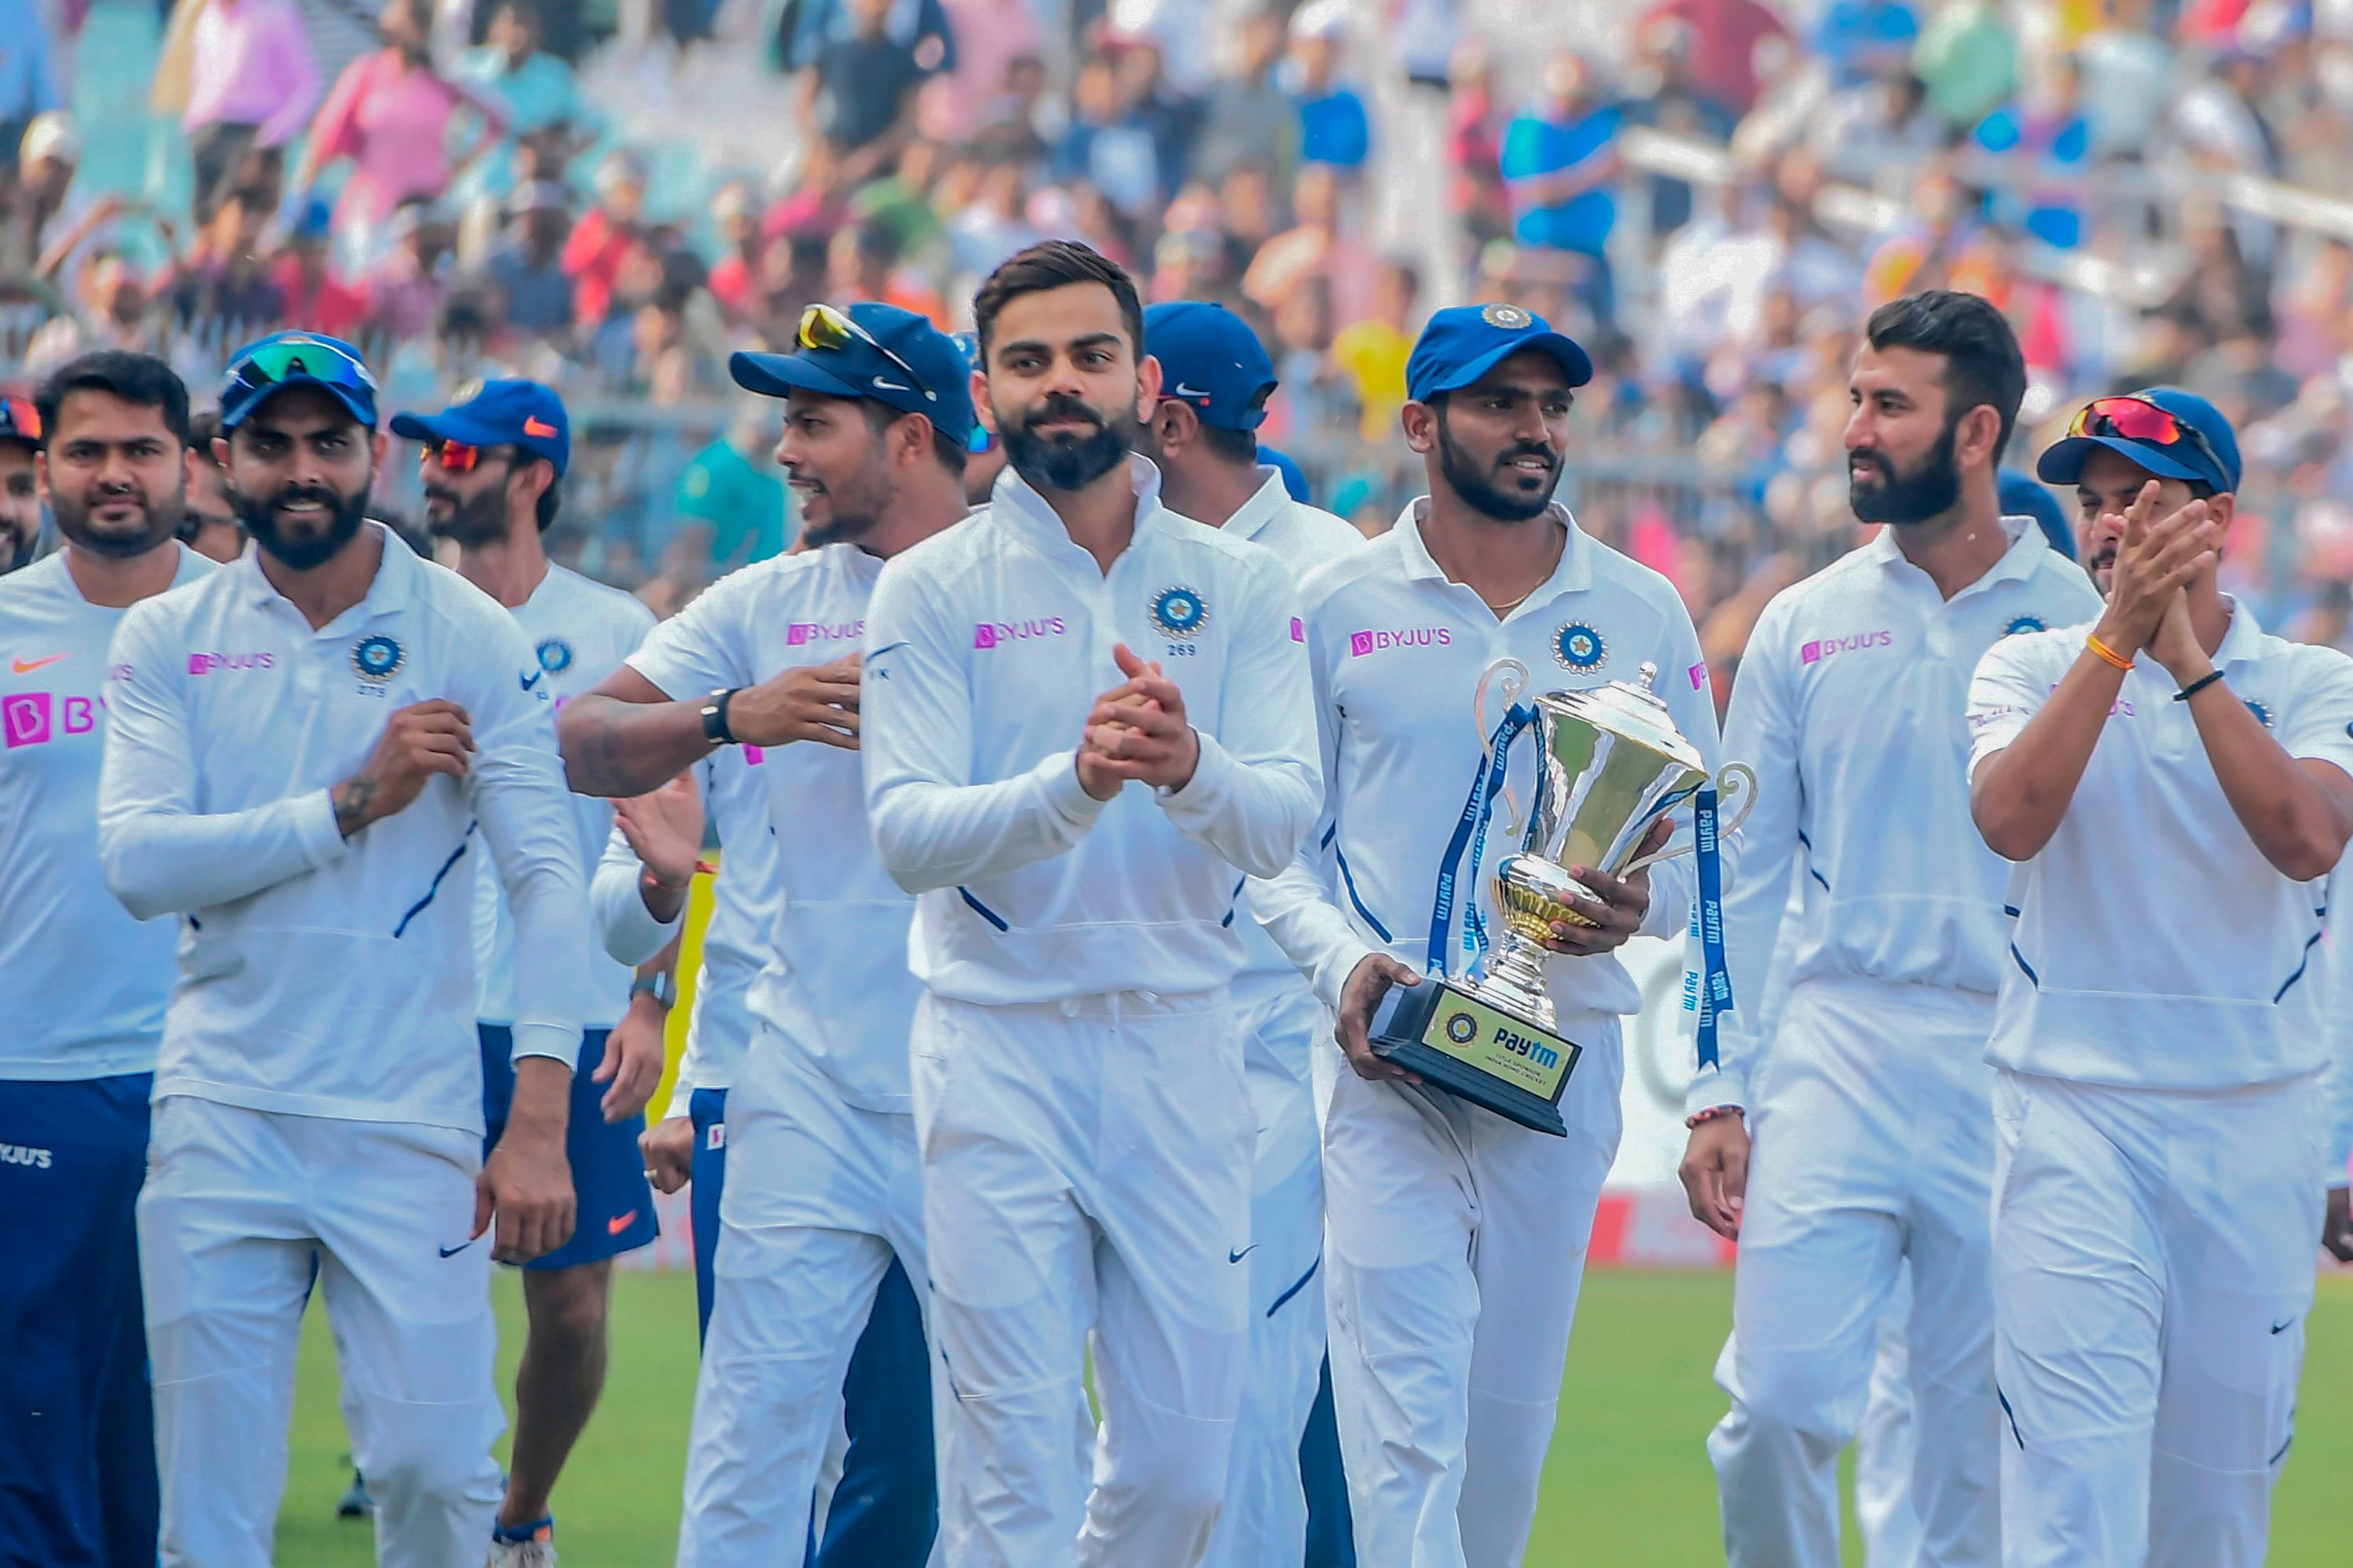 India's cricketers celebrate after winning the match during the third day of the second Test cricket match of a two-match series between India and Bangladesh at the Eden Gardens cricket stadium in Kolkata. (AFP Photo)